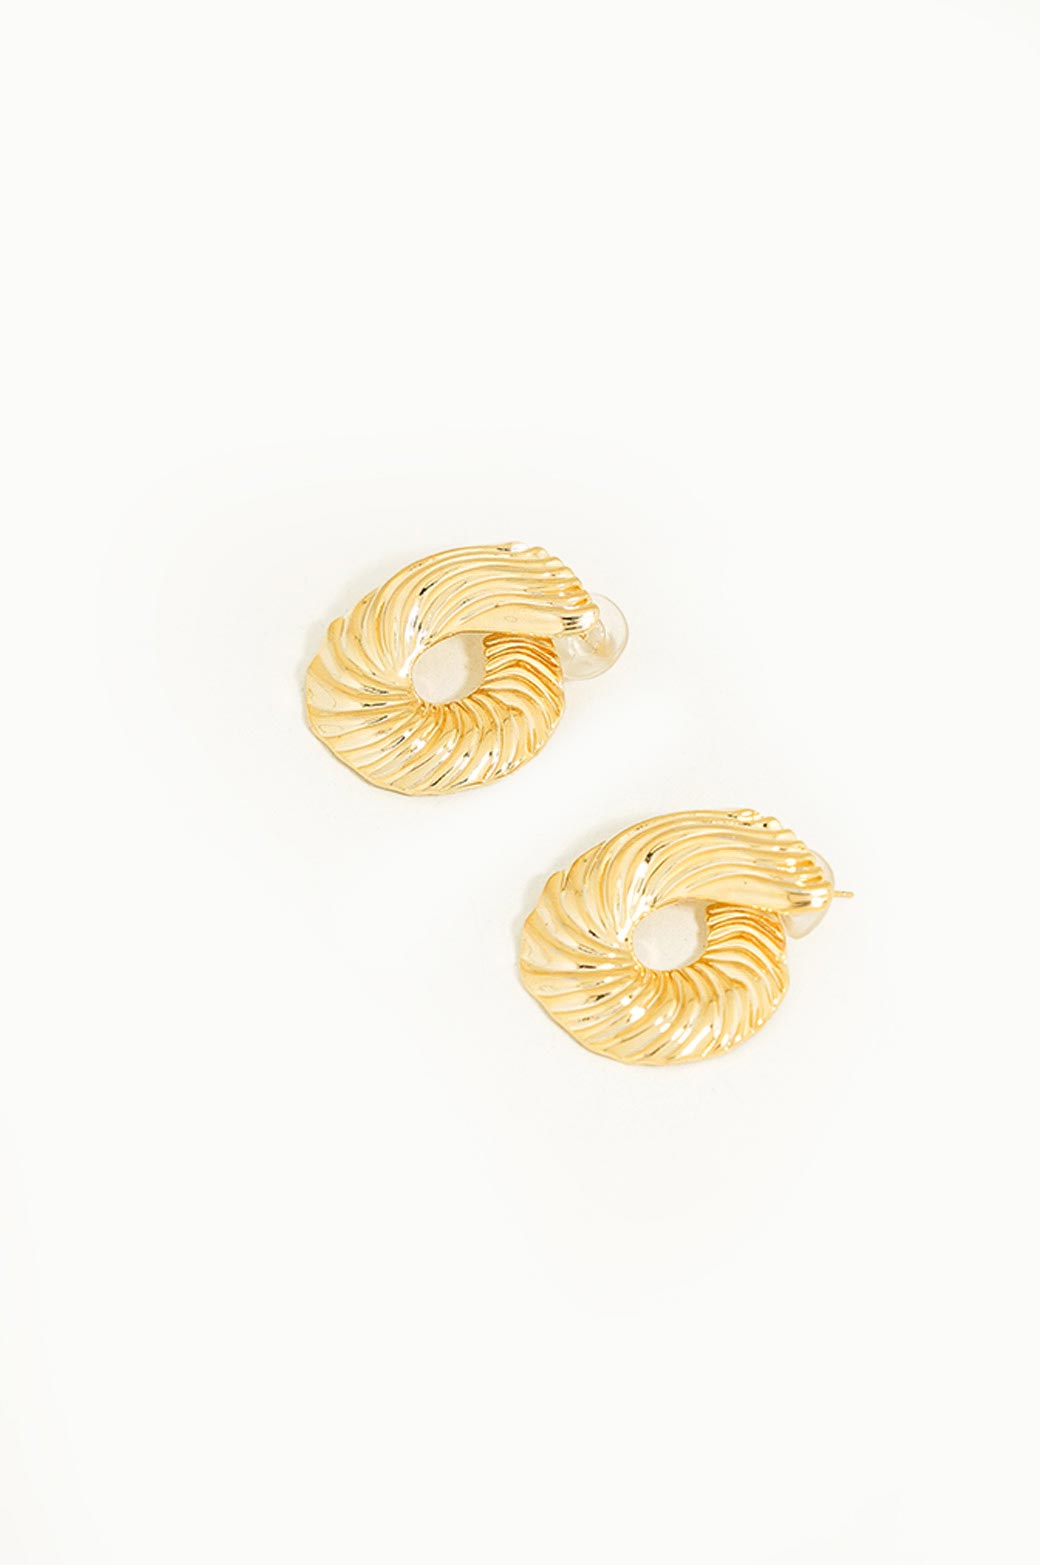 GOLD TWISTED GOLD EARRINGS